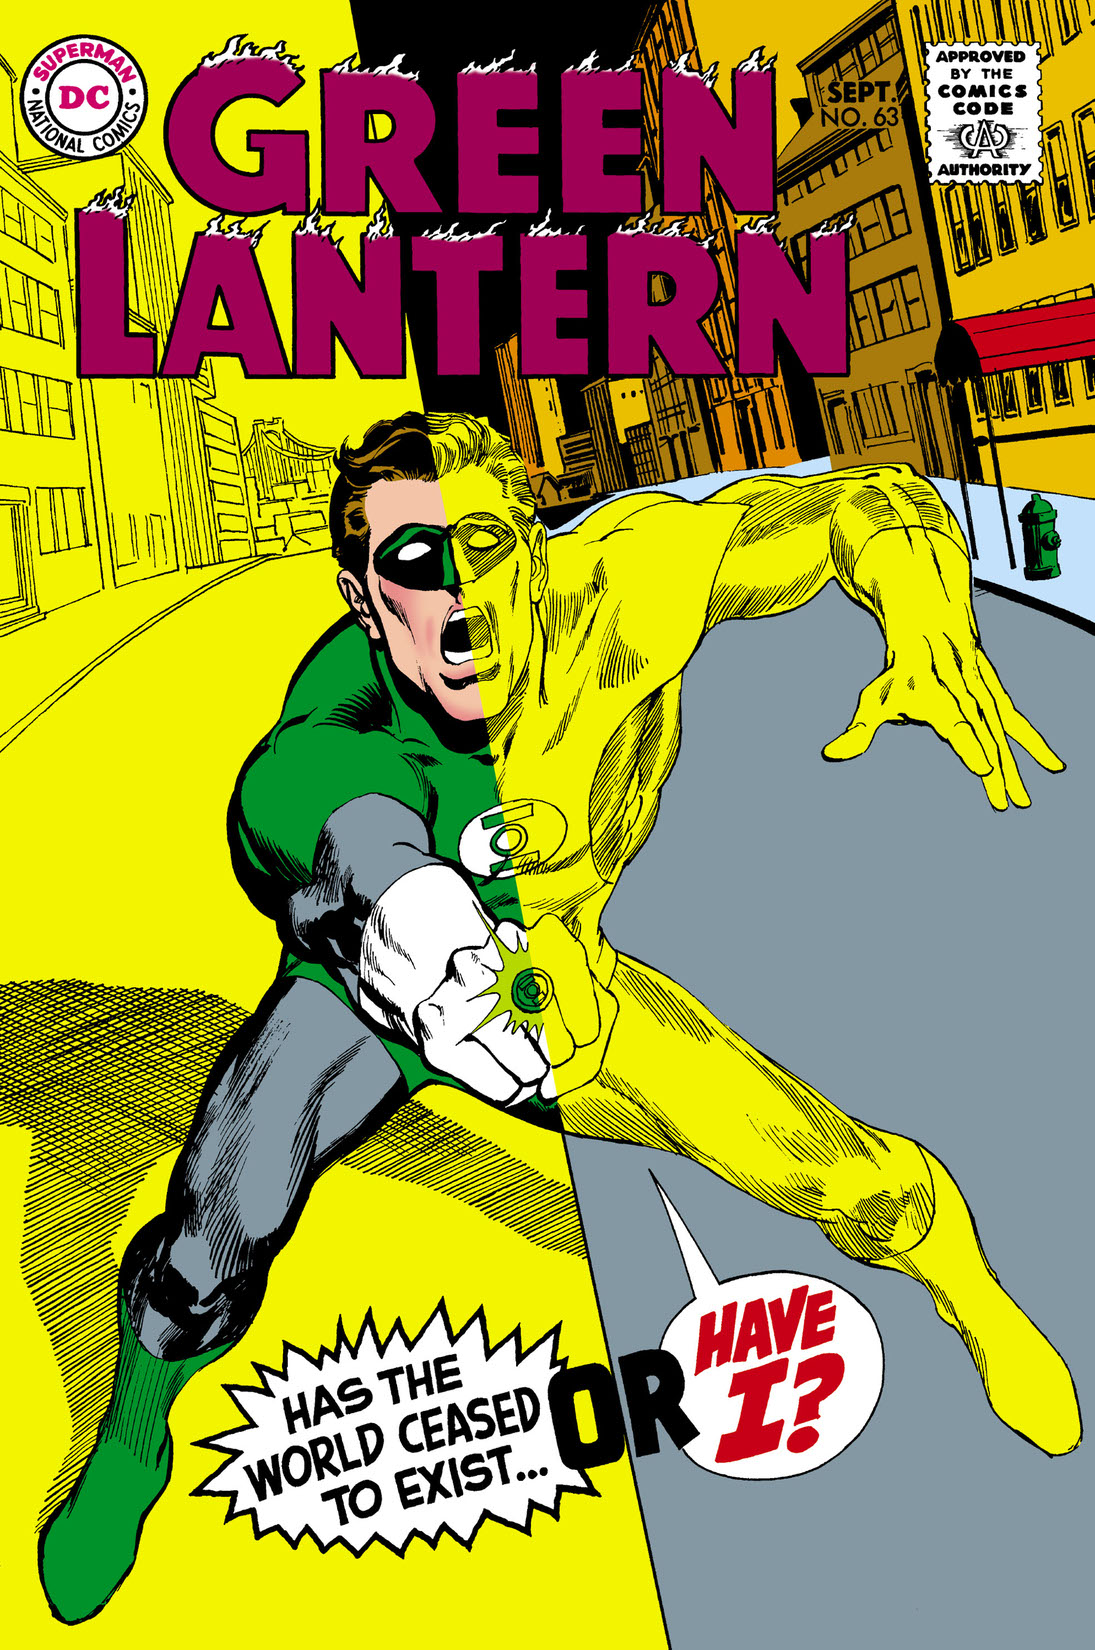 Green Lantern (1960-) #63 preview images